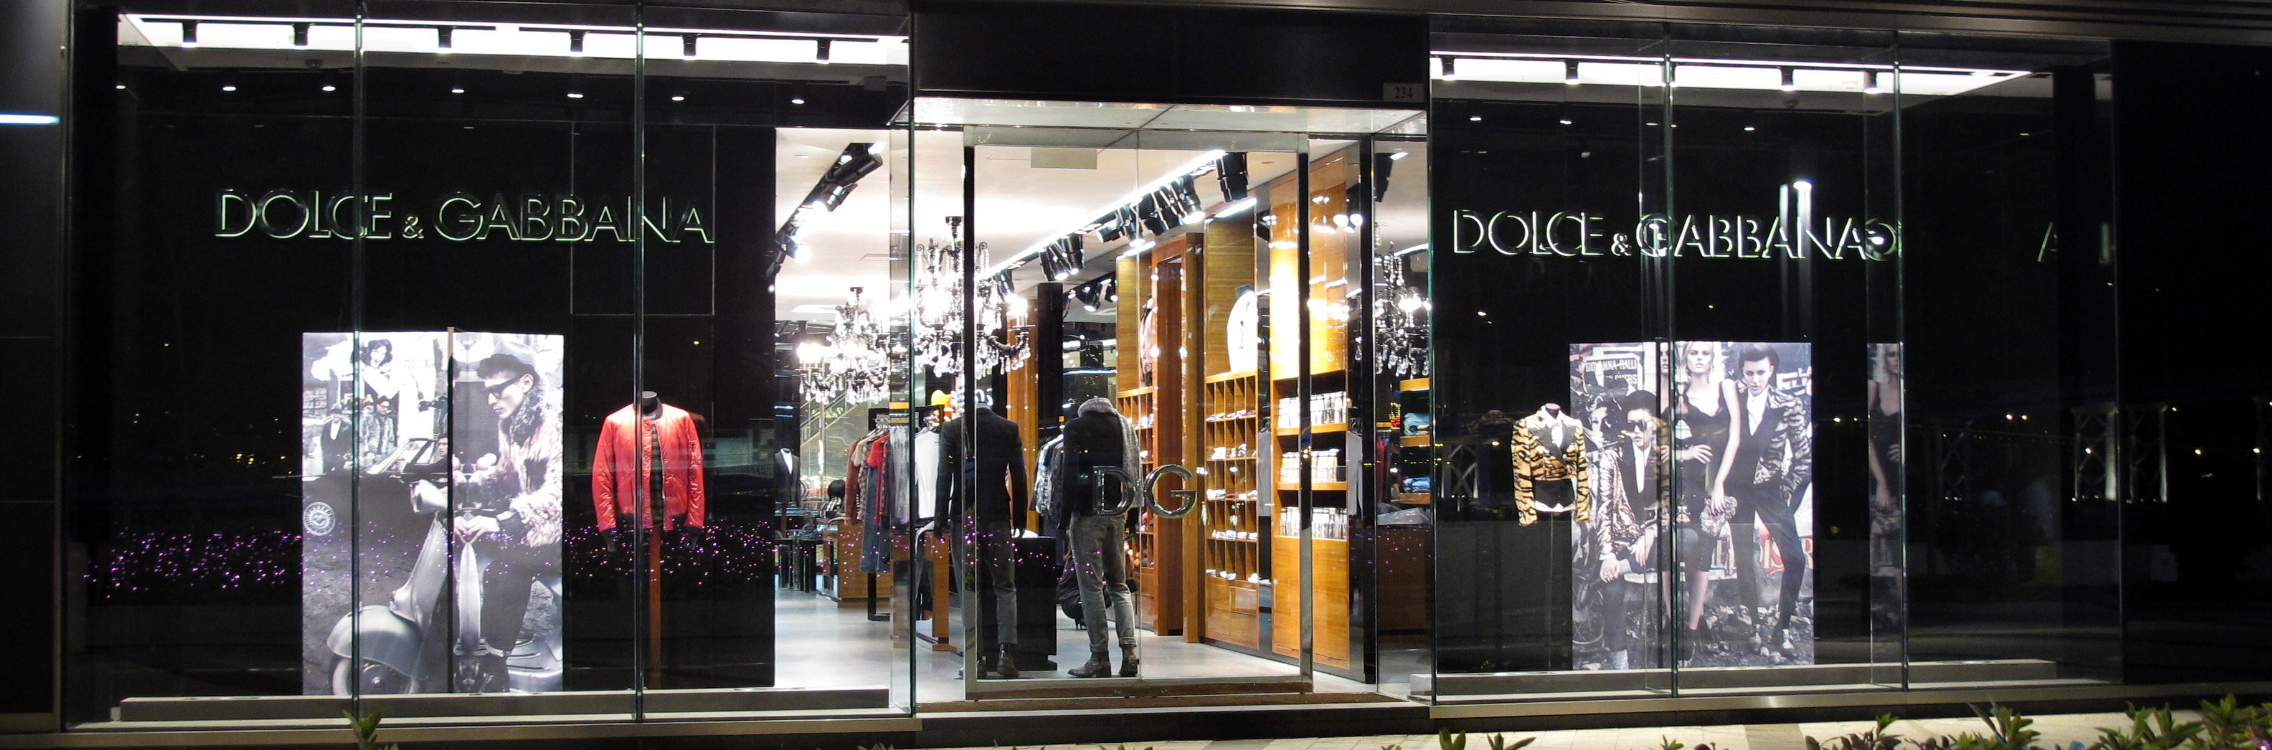 Three years after ad controversy, D&G is still struggling to win back China